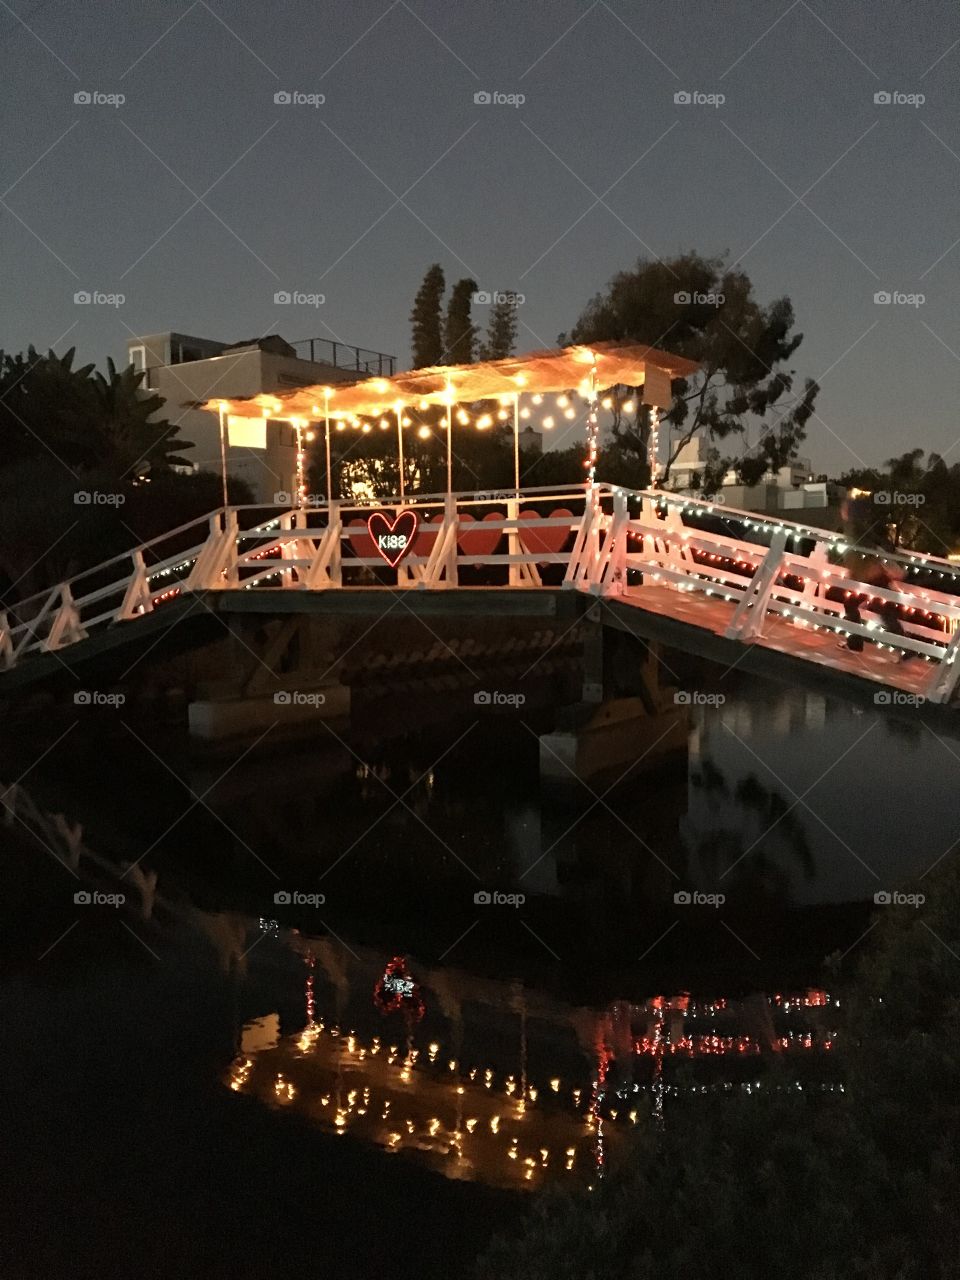 Bridge of love over the Venice canals 